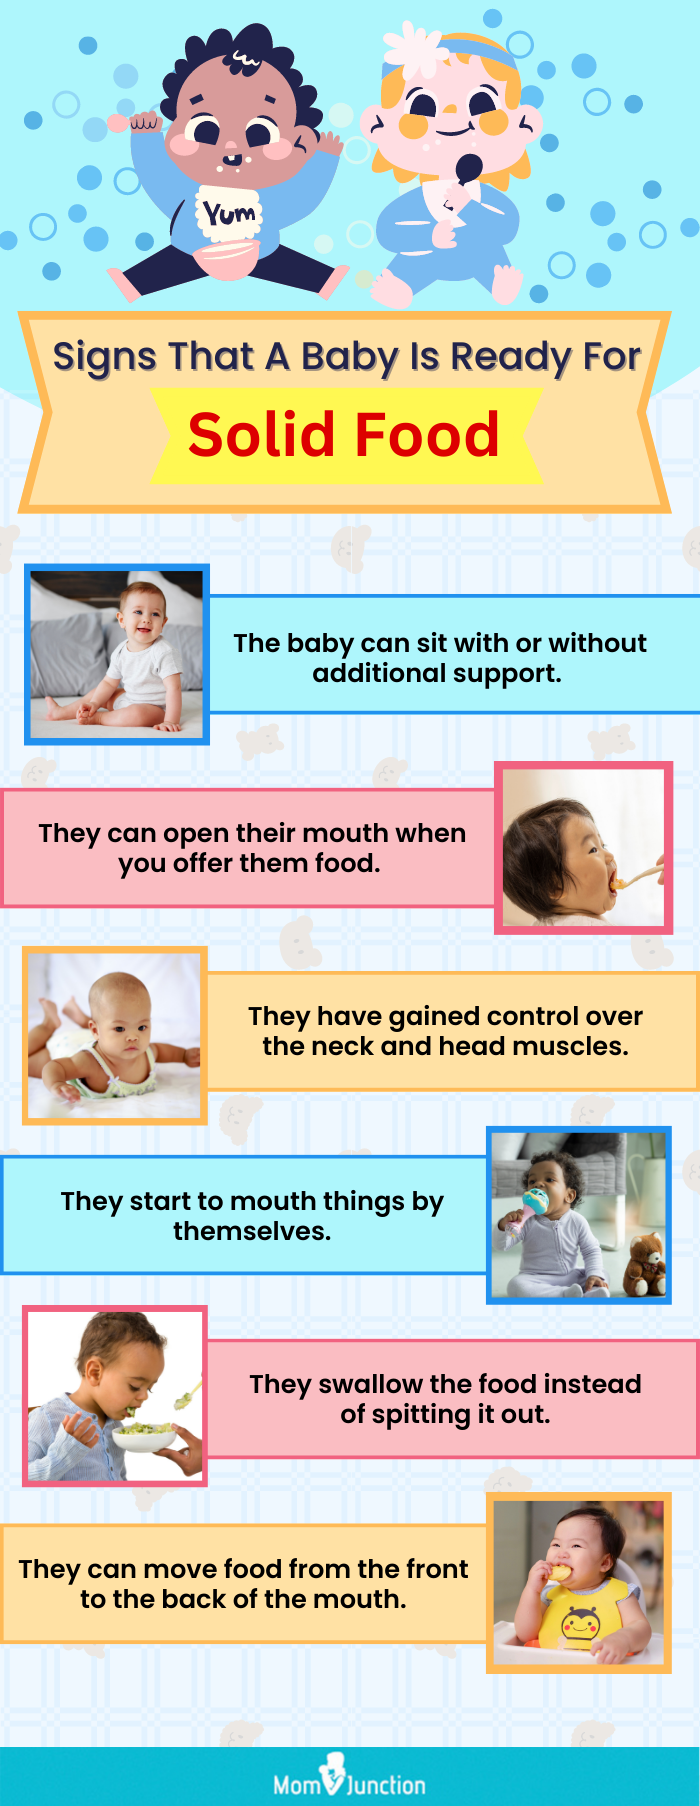 Signs That A Baby Is Ready For Solid Food